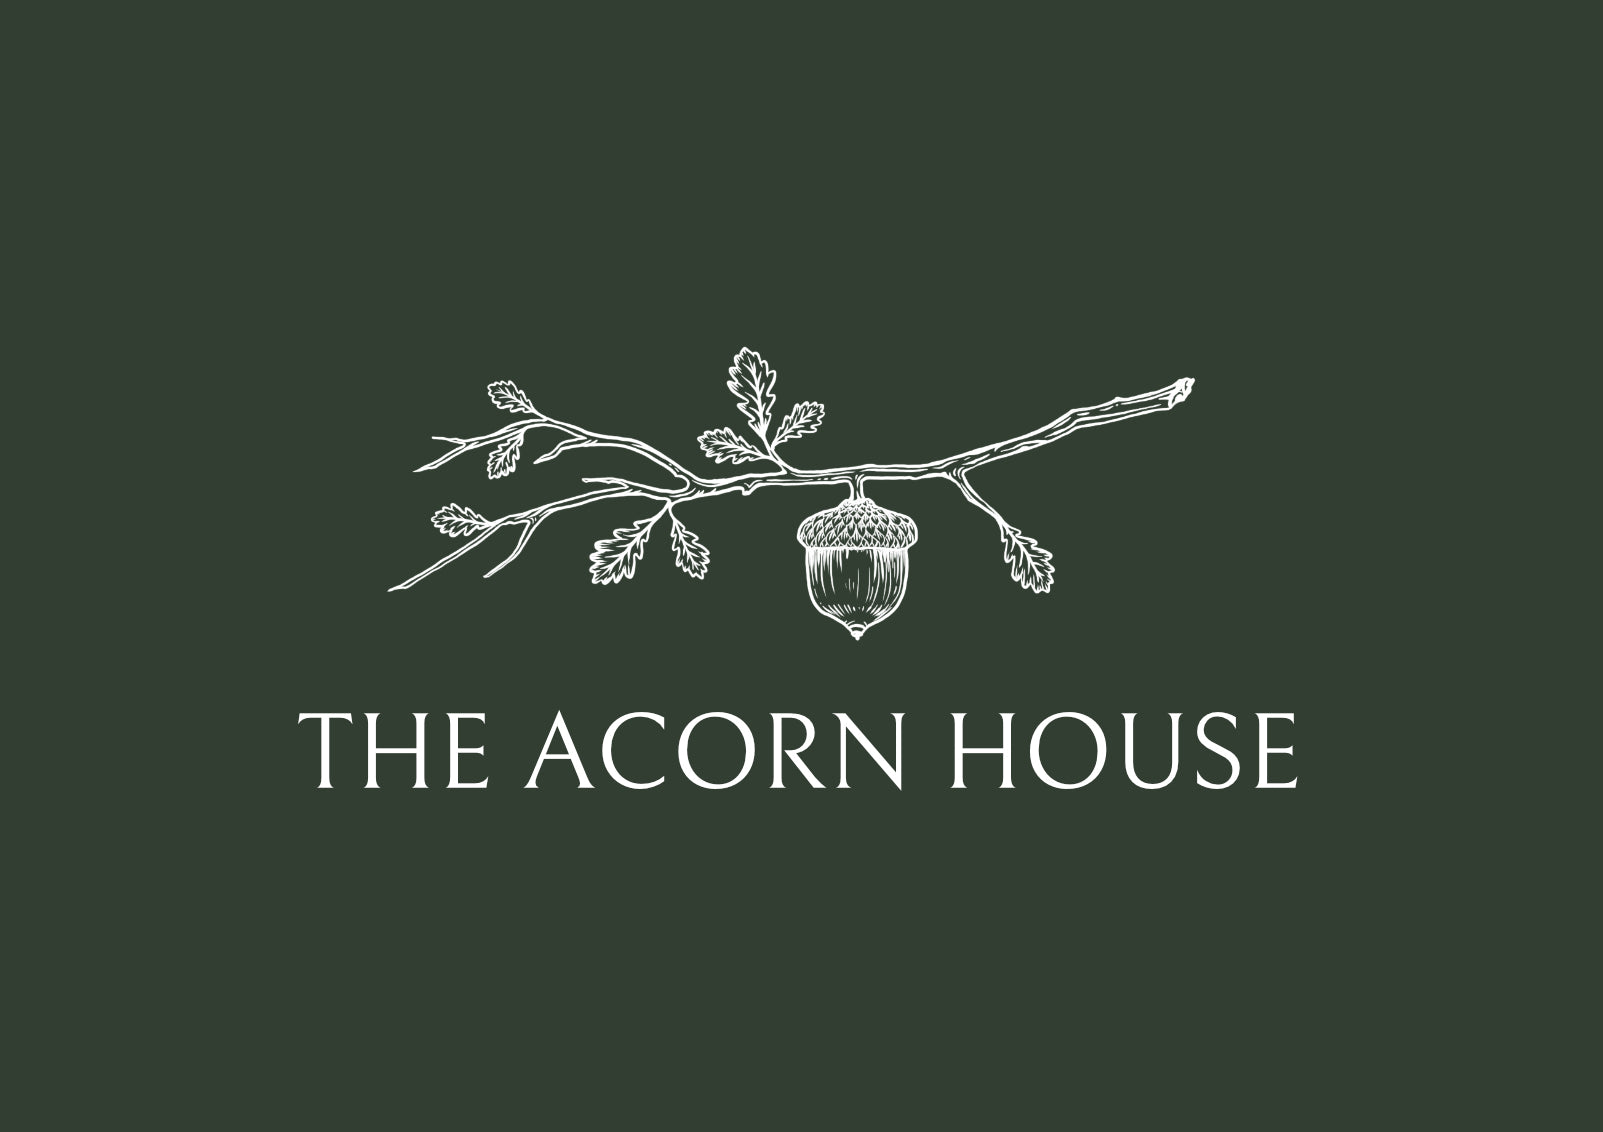 the acorn house logo on green background